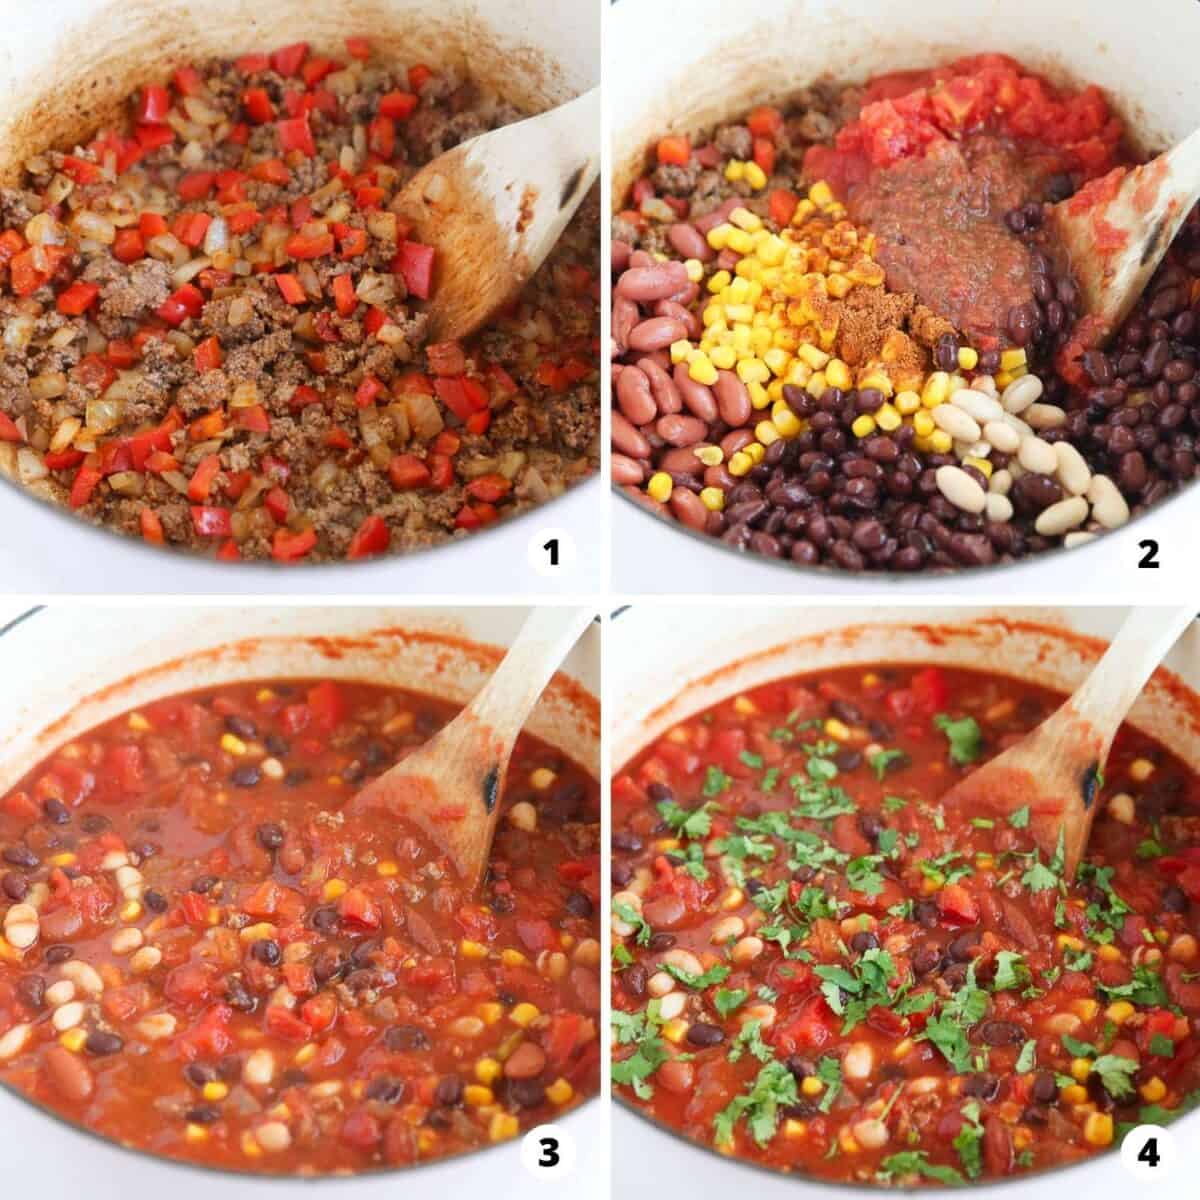 The process of making taco soup in a 4 step collage. 